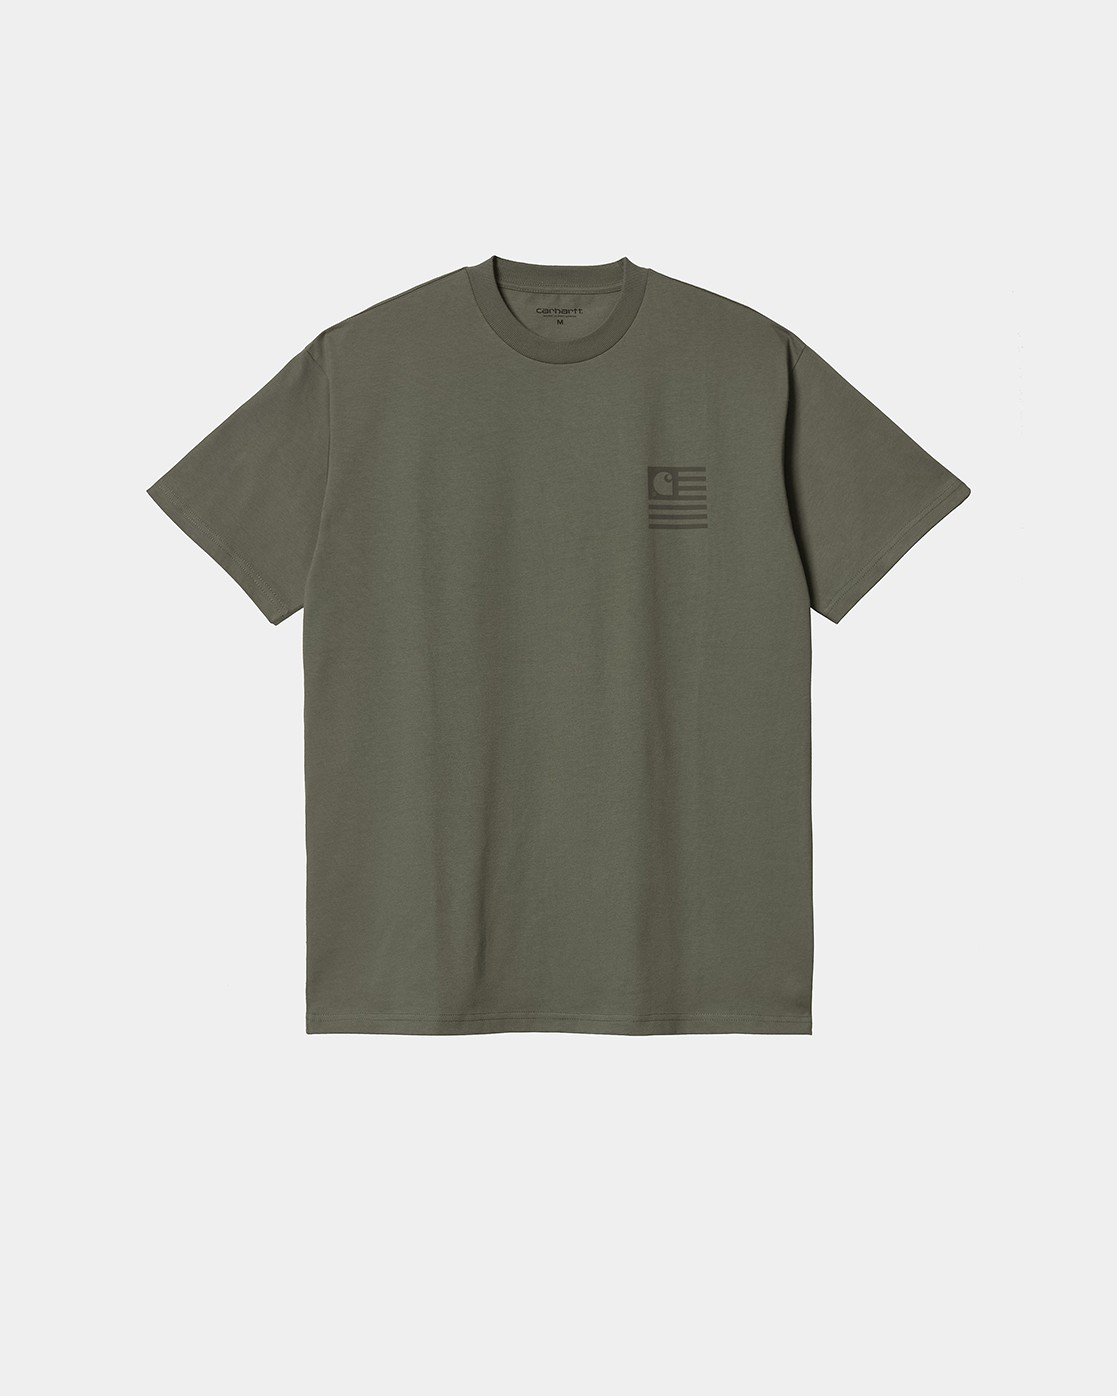 S/s Medley State T-shirt